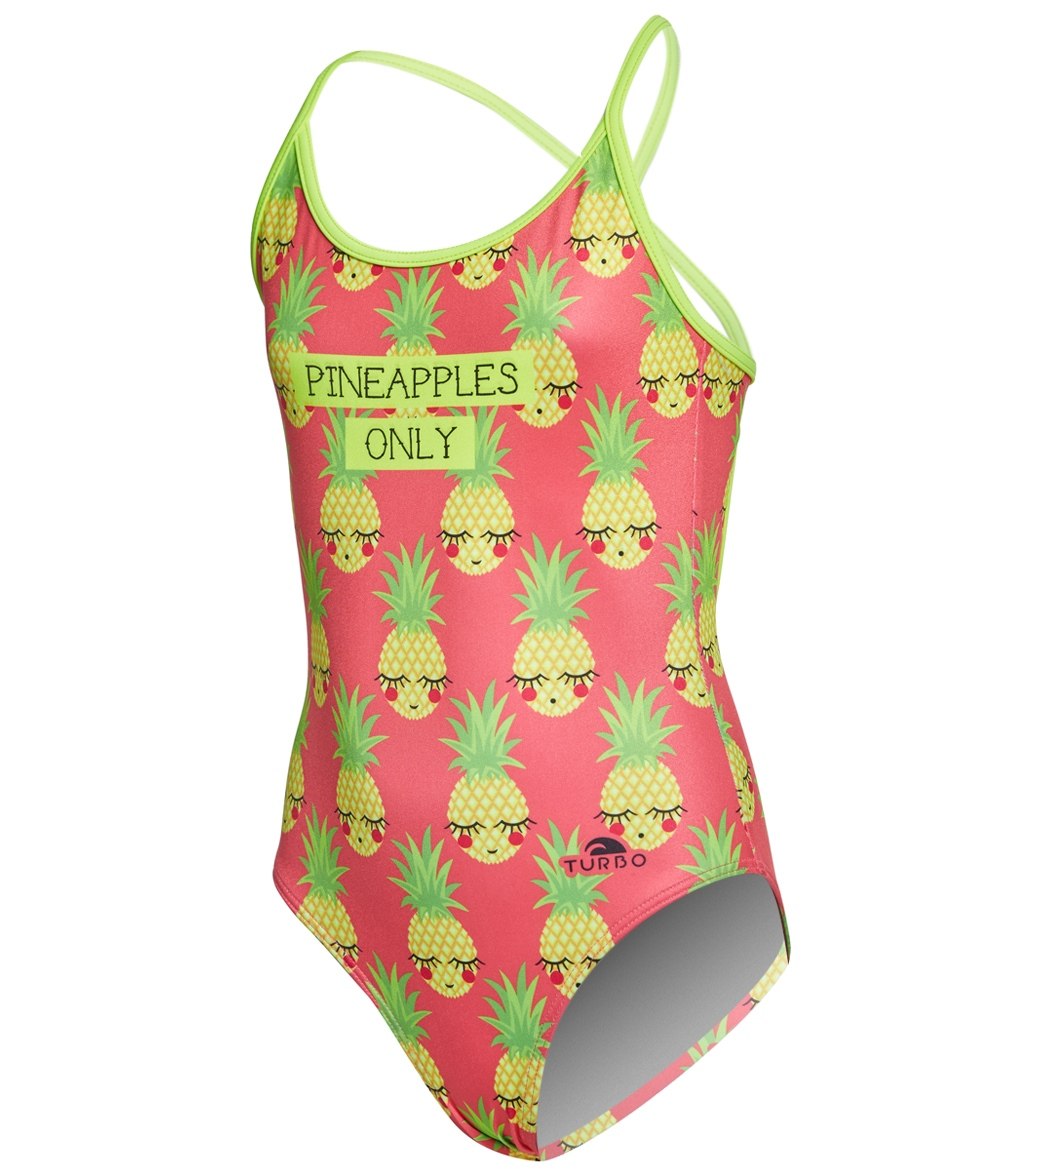 Turbo Girls' Pineapples Only One Piece Swimsuit - Fuchsia 12 Months Polyester/Pbt - Swimoutlet.com